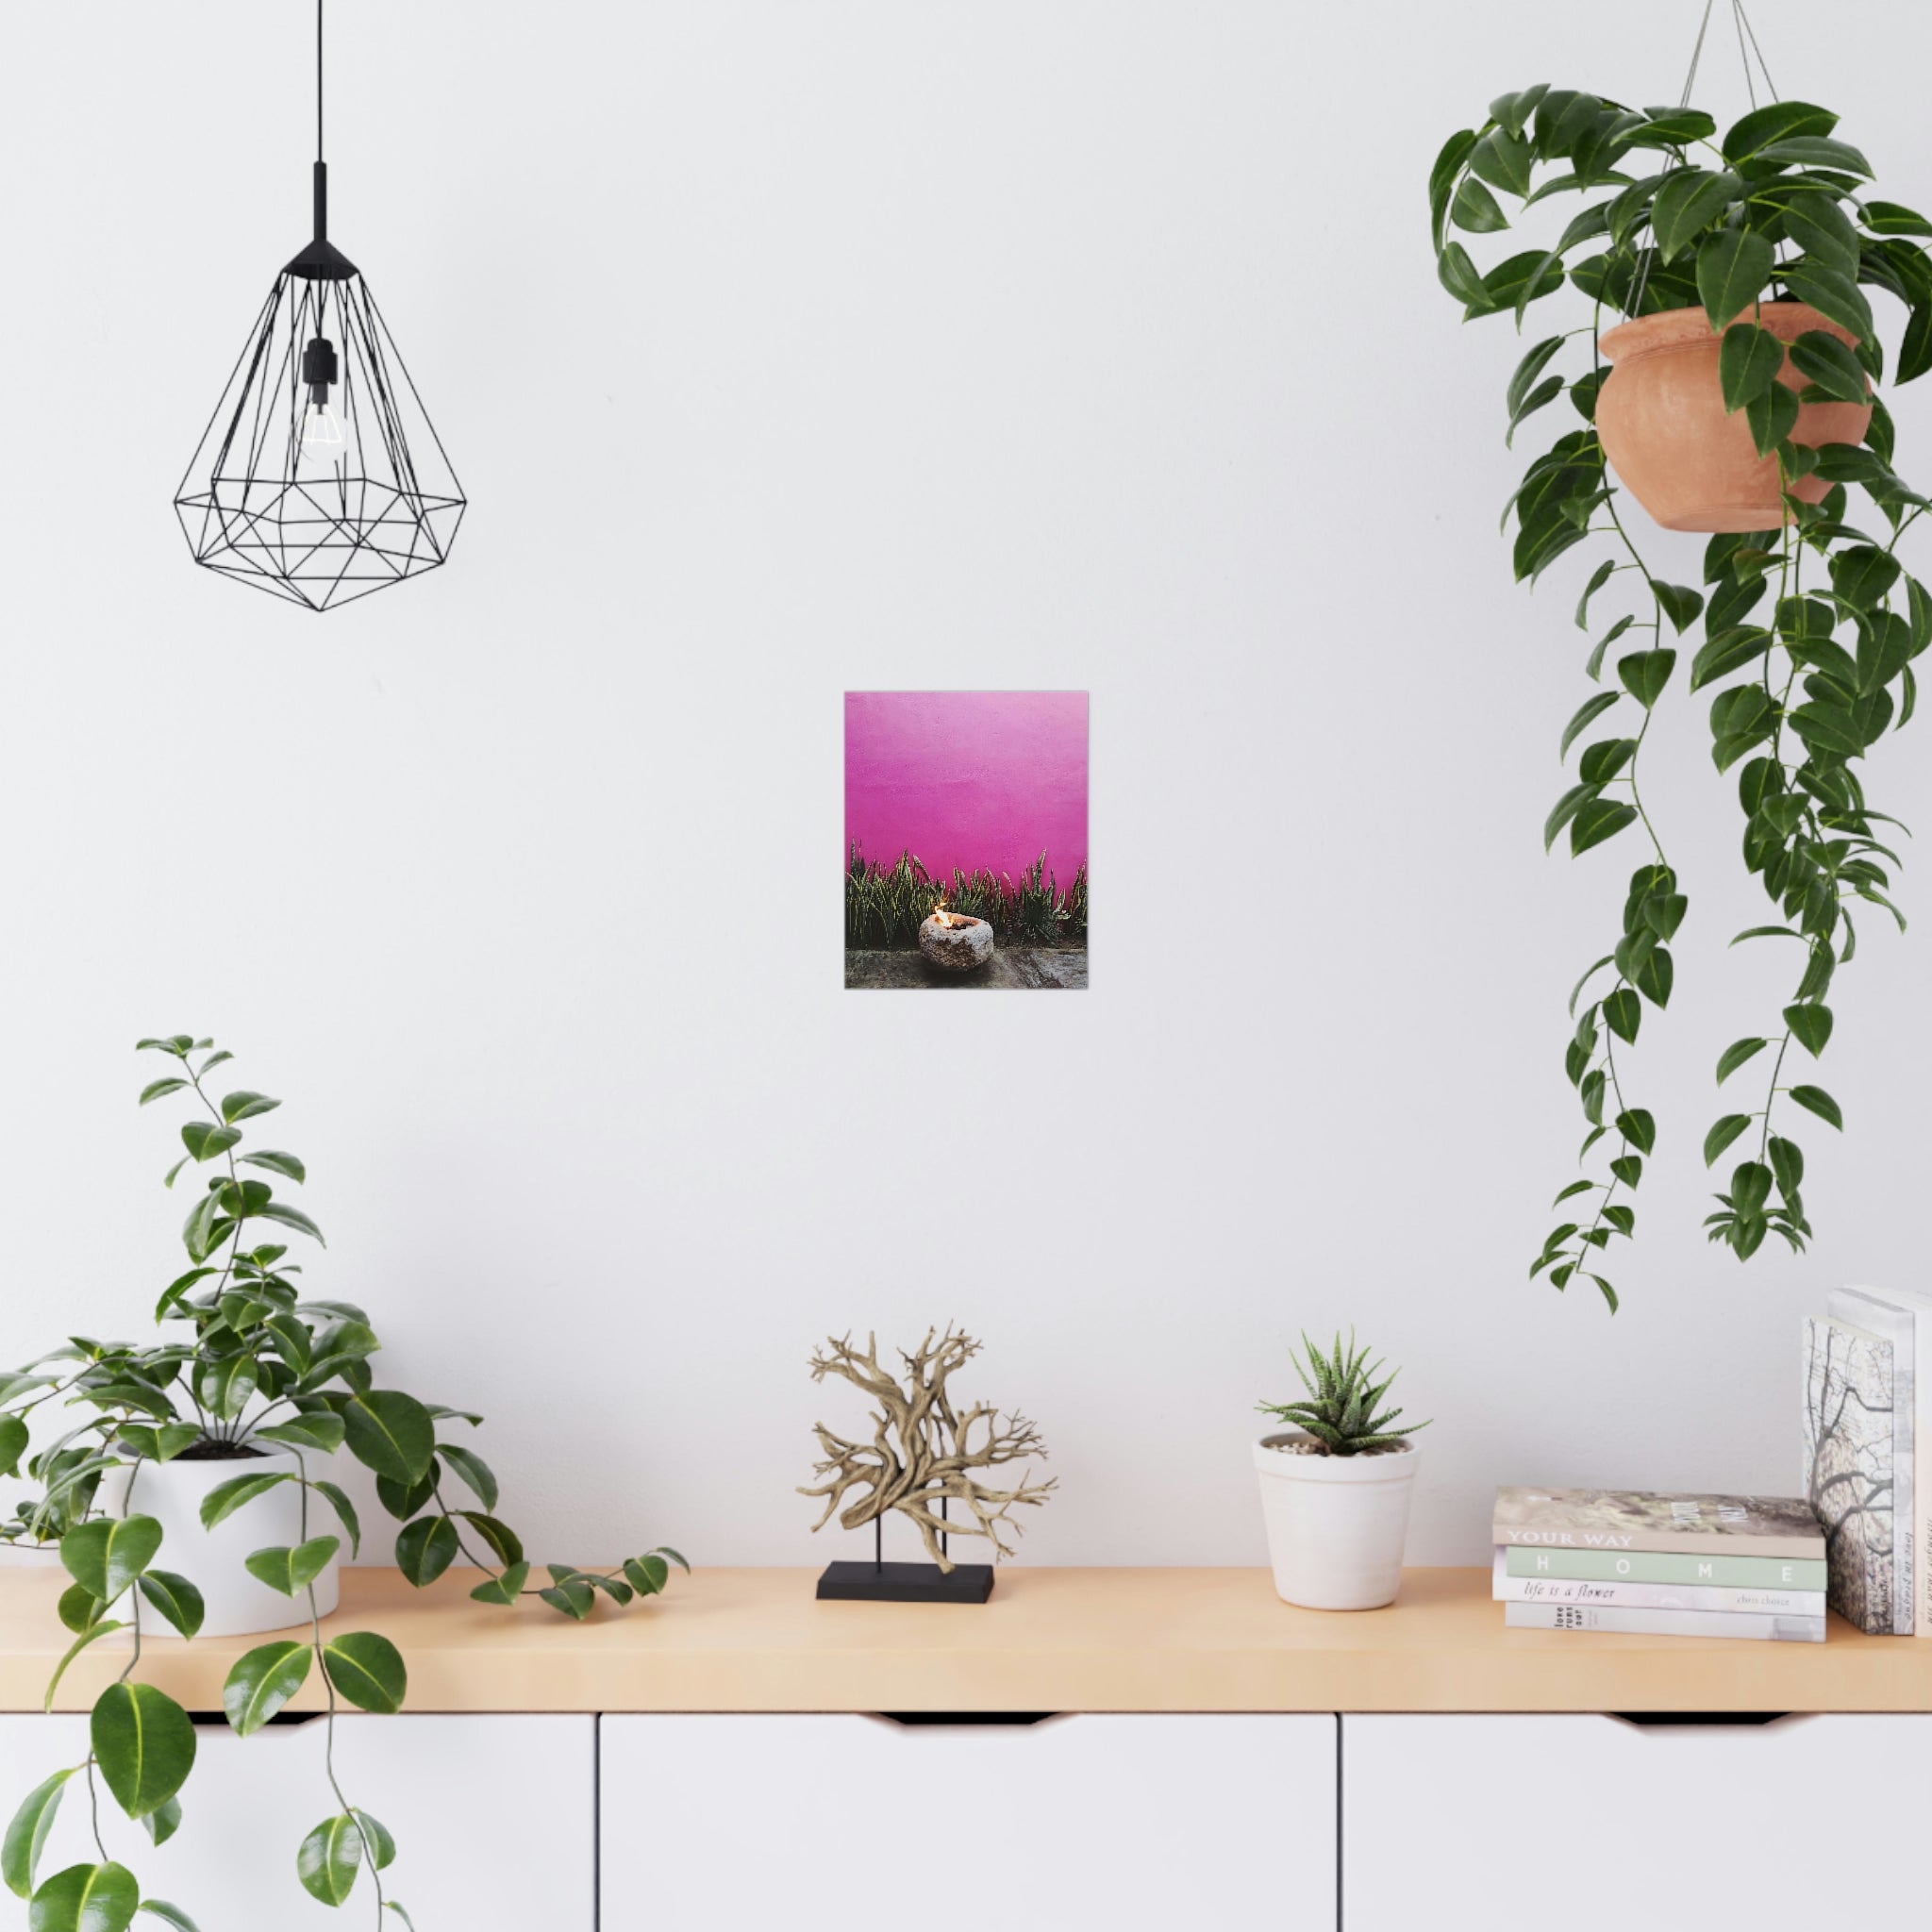 Hot Pink painted wall and organic green - Original photo print on Premium Matte Posters